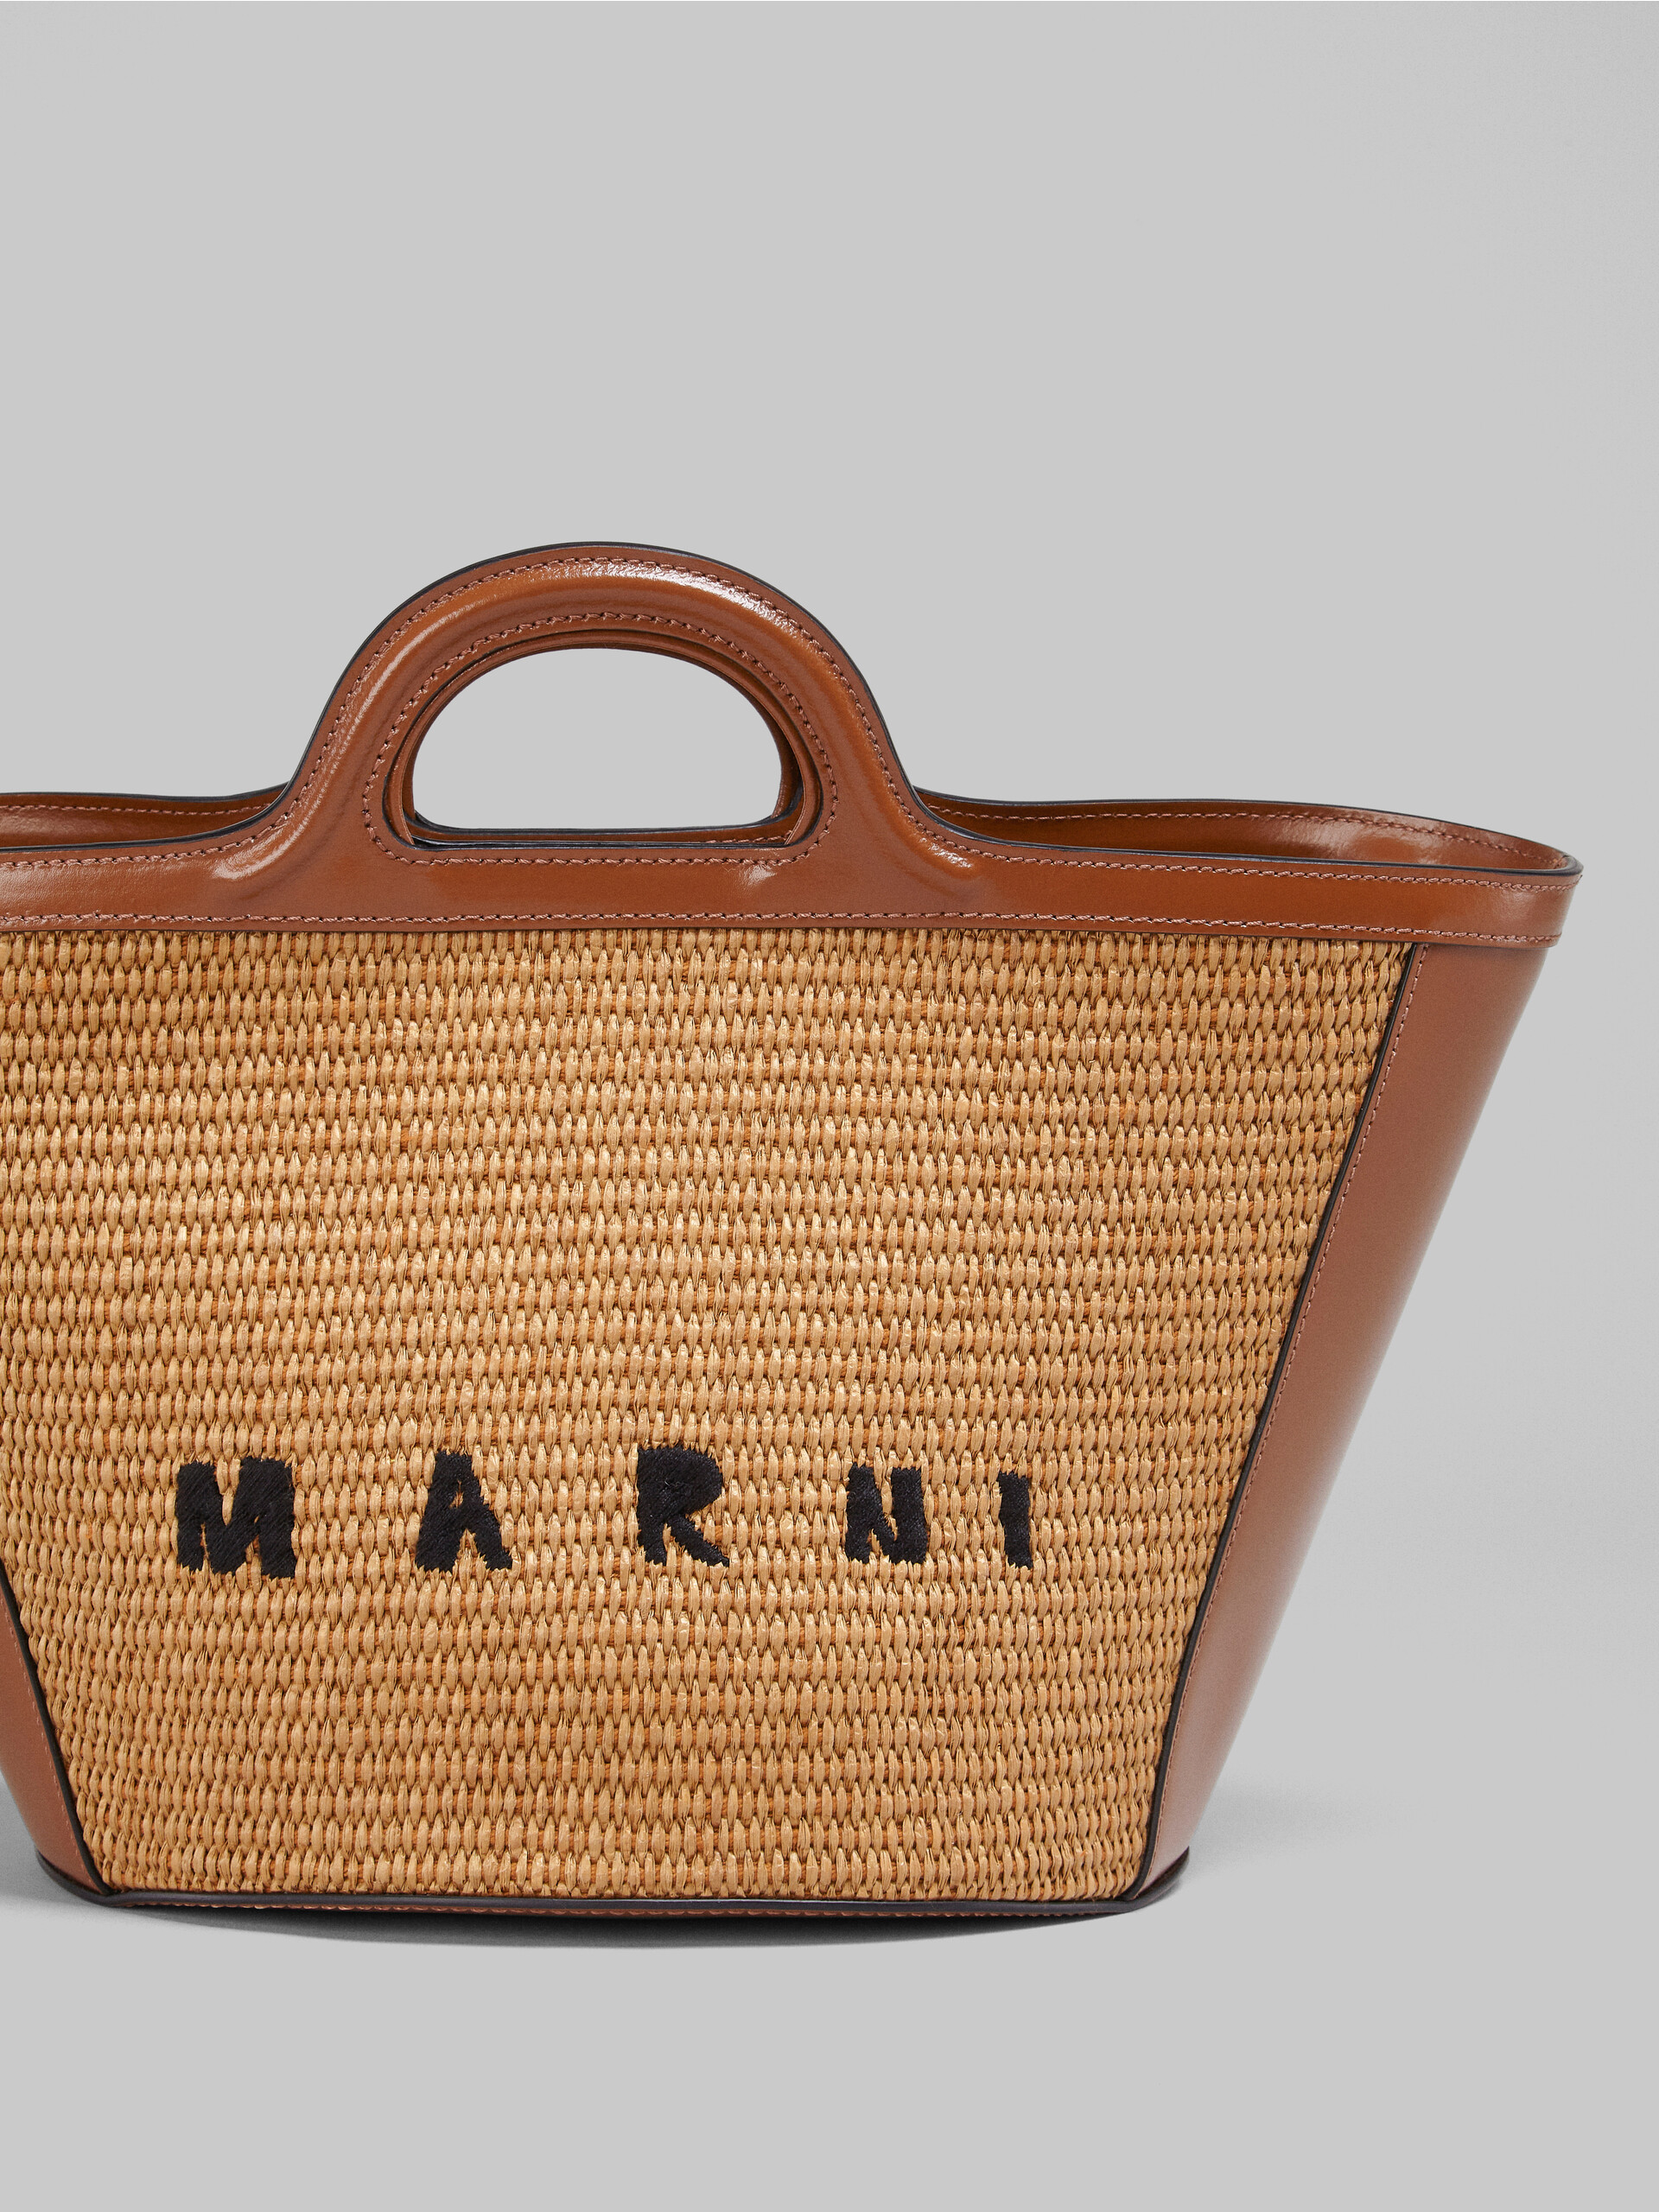 TROPICALIA small bag in brown leather and raffia